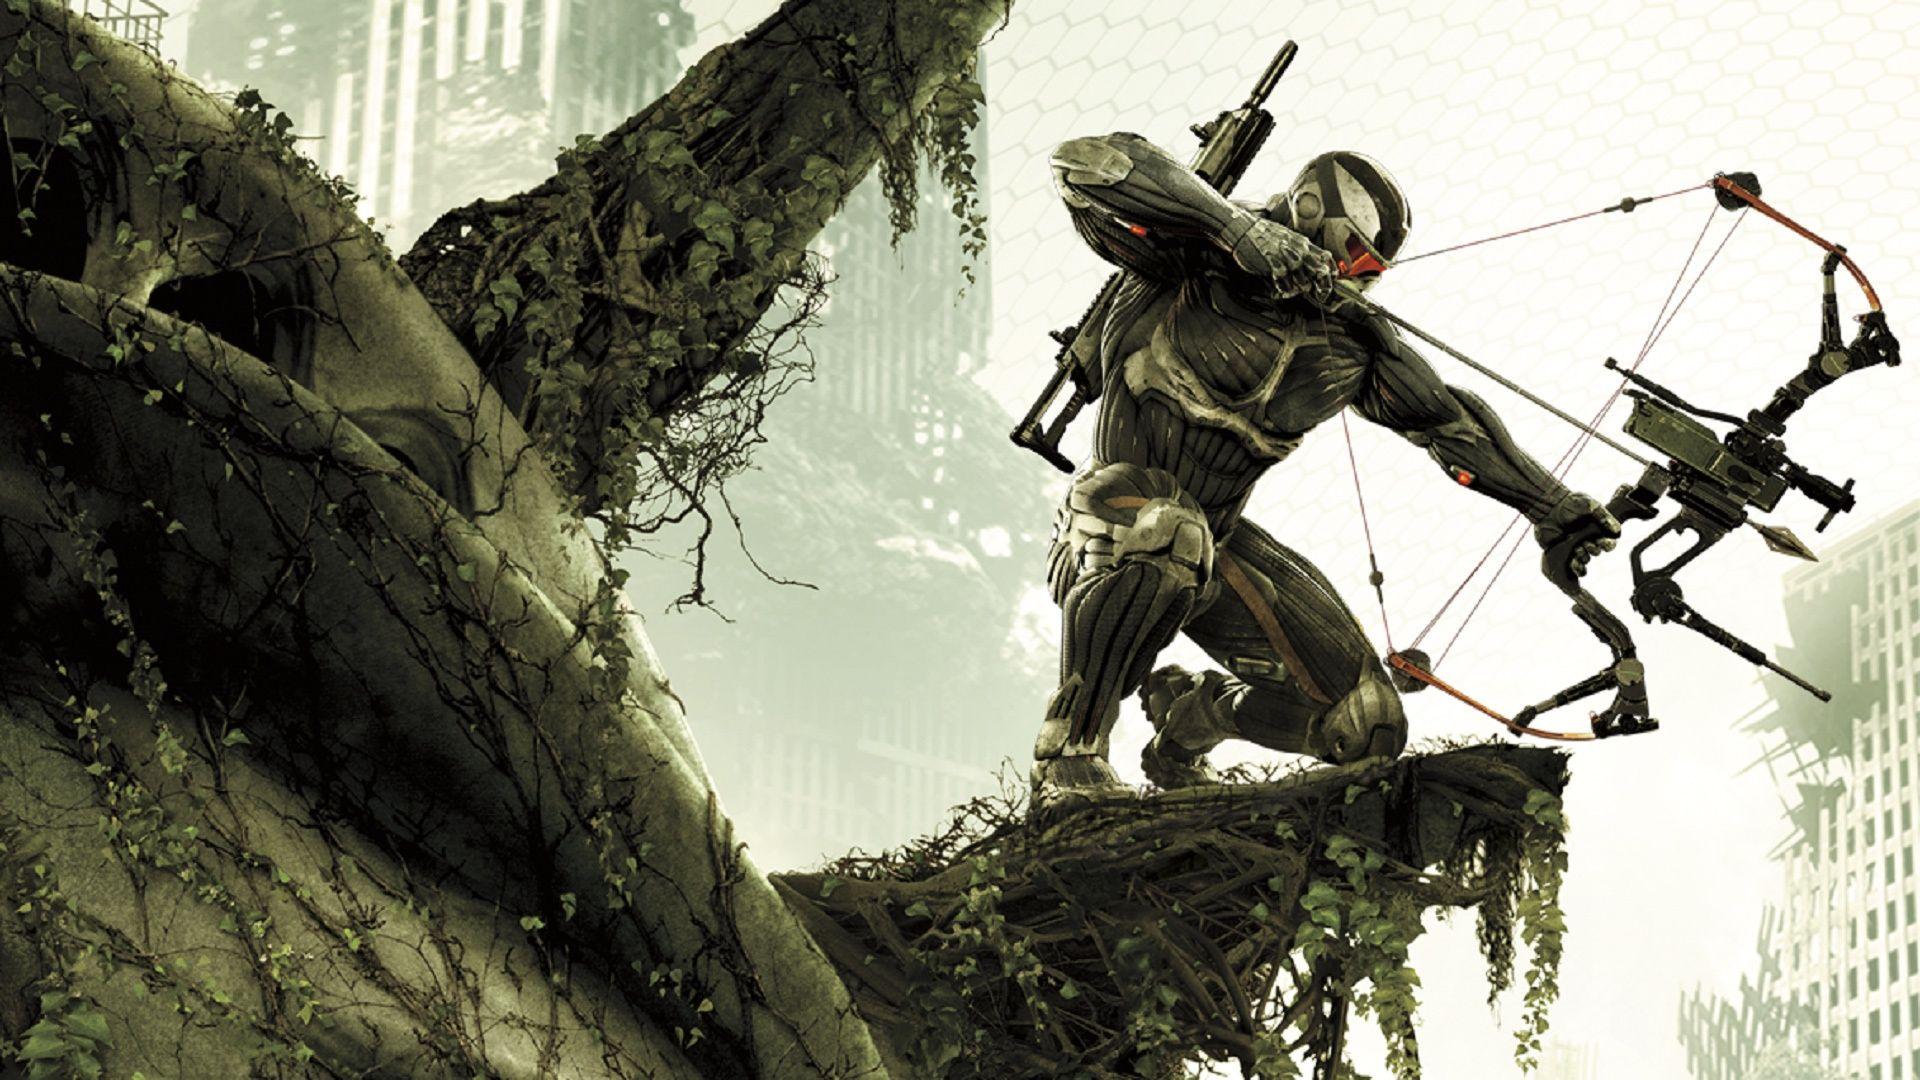 Wallpaper Crysis 3 HD game 1920x1080 Full HD Picture, Image